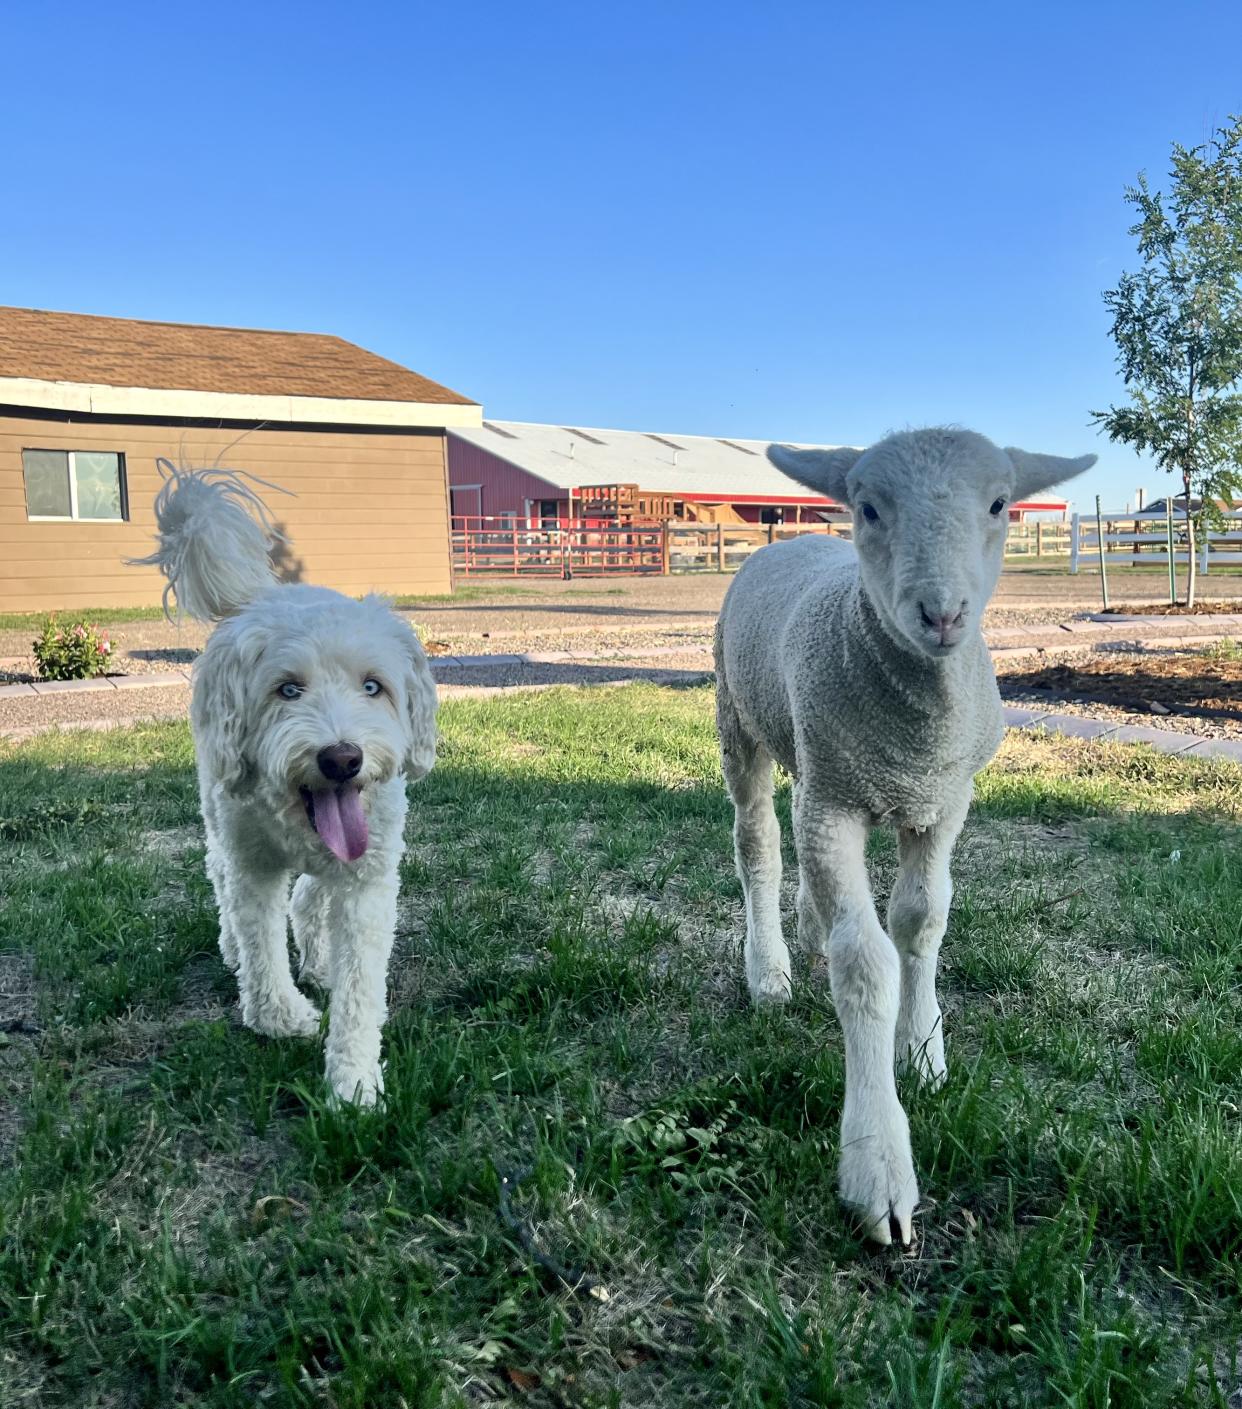 Buddha, a rescue dog, befriends baby animals like Cheerio when they come to Luvin Arms Animal Sanctuary in Erie, Colorado.  (Courtesy of Luvin Arms Animal Sanctuary)